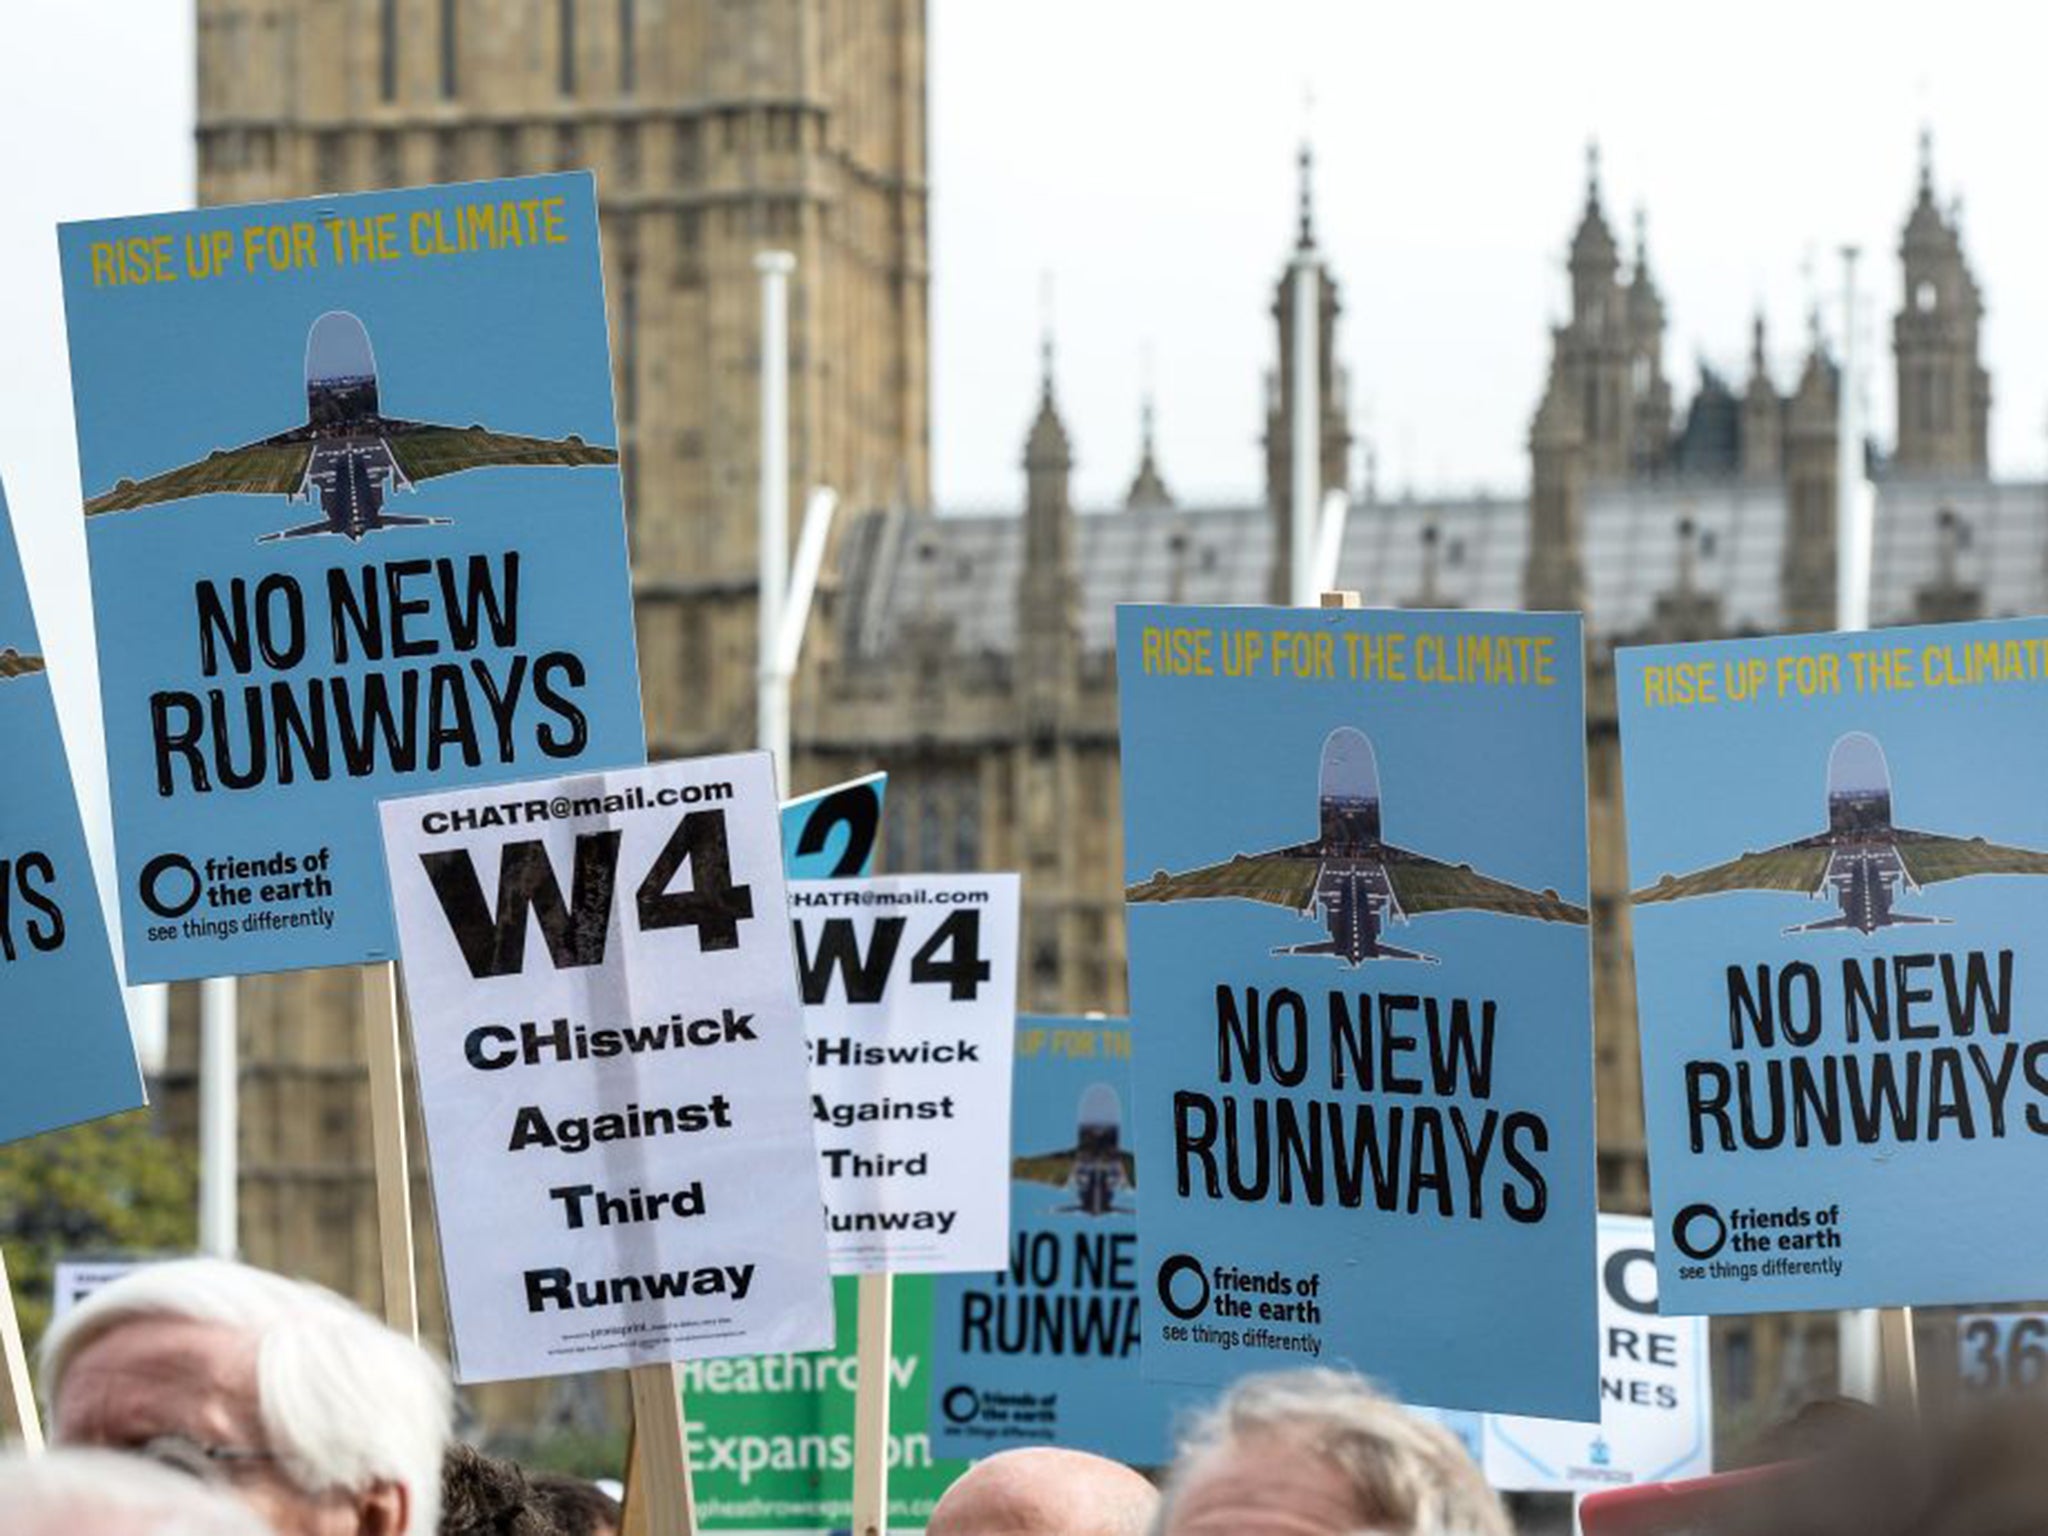 &#13;
Protesters at a rally against expansion at Heathrow gather in Parliament Square, London, in October &#13;